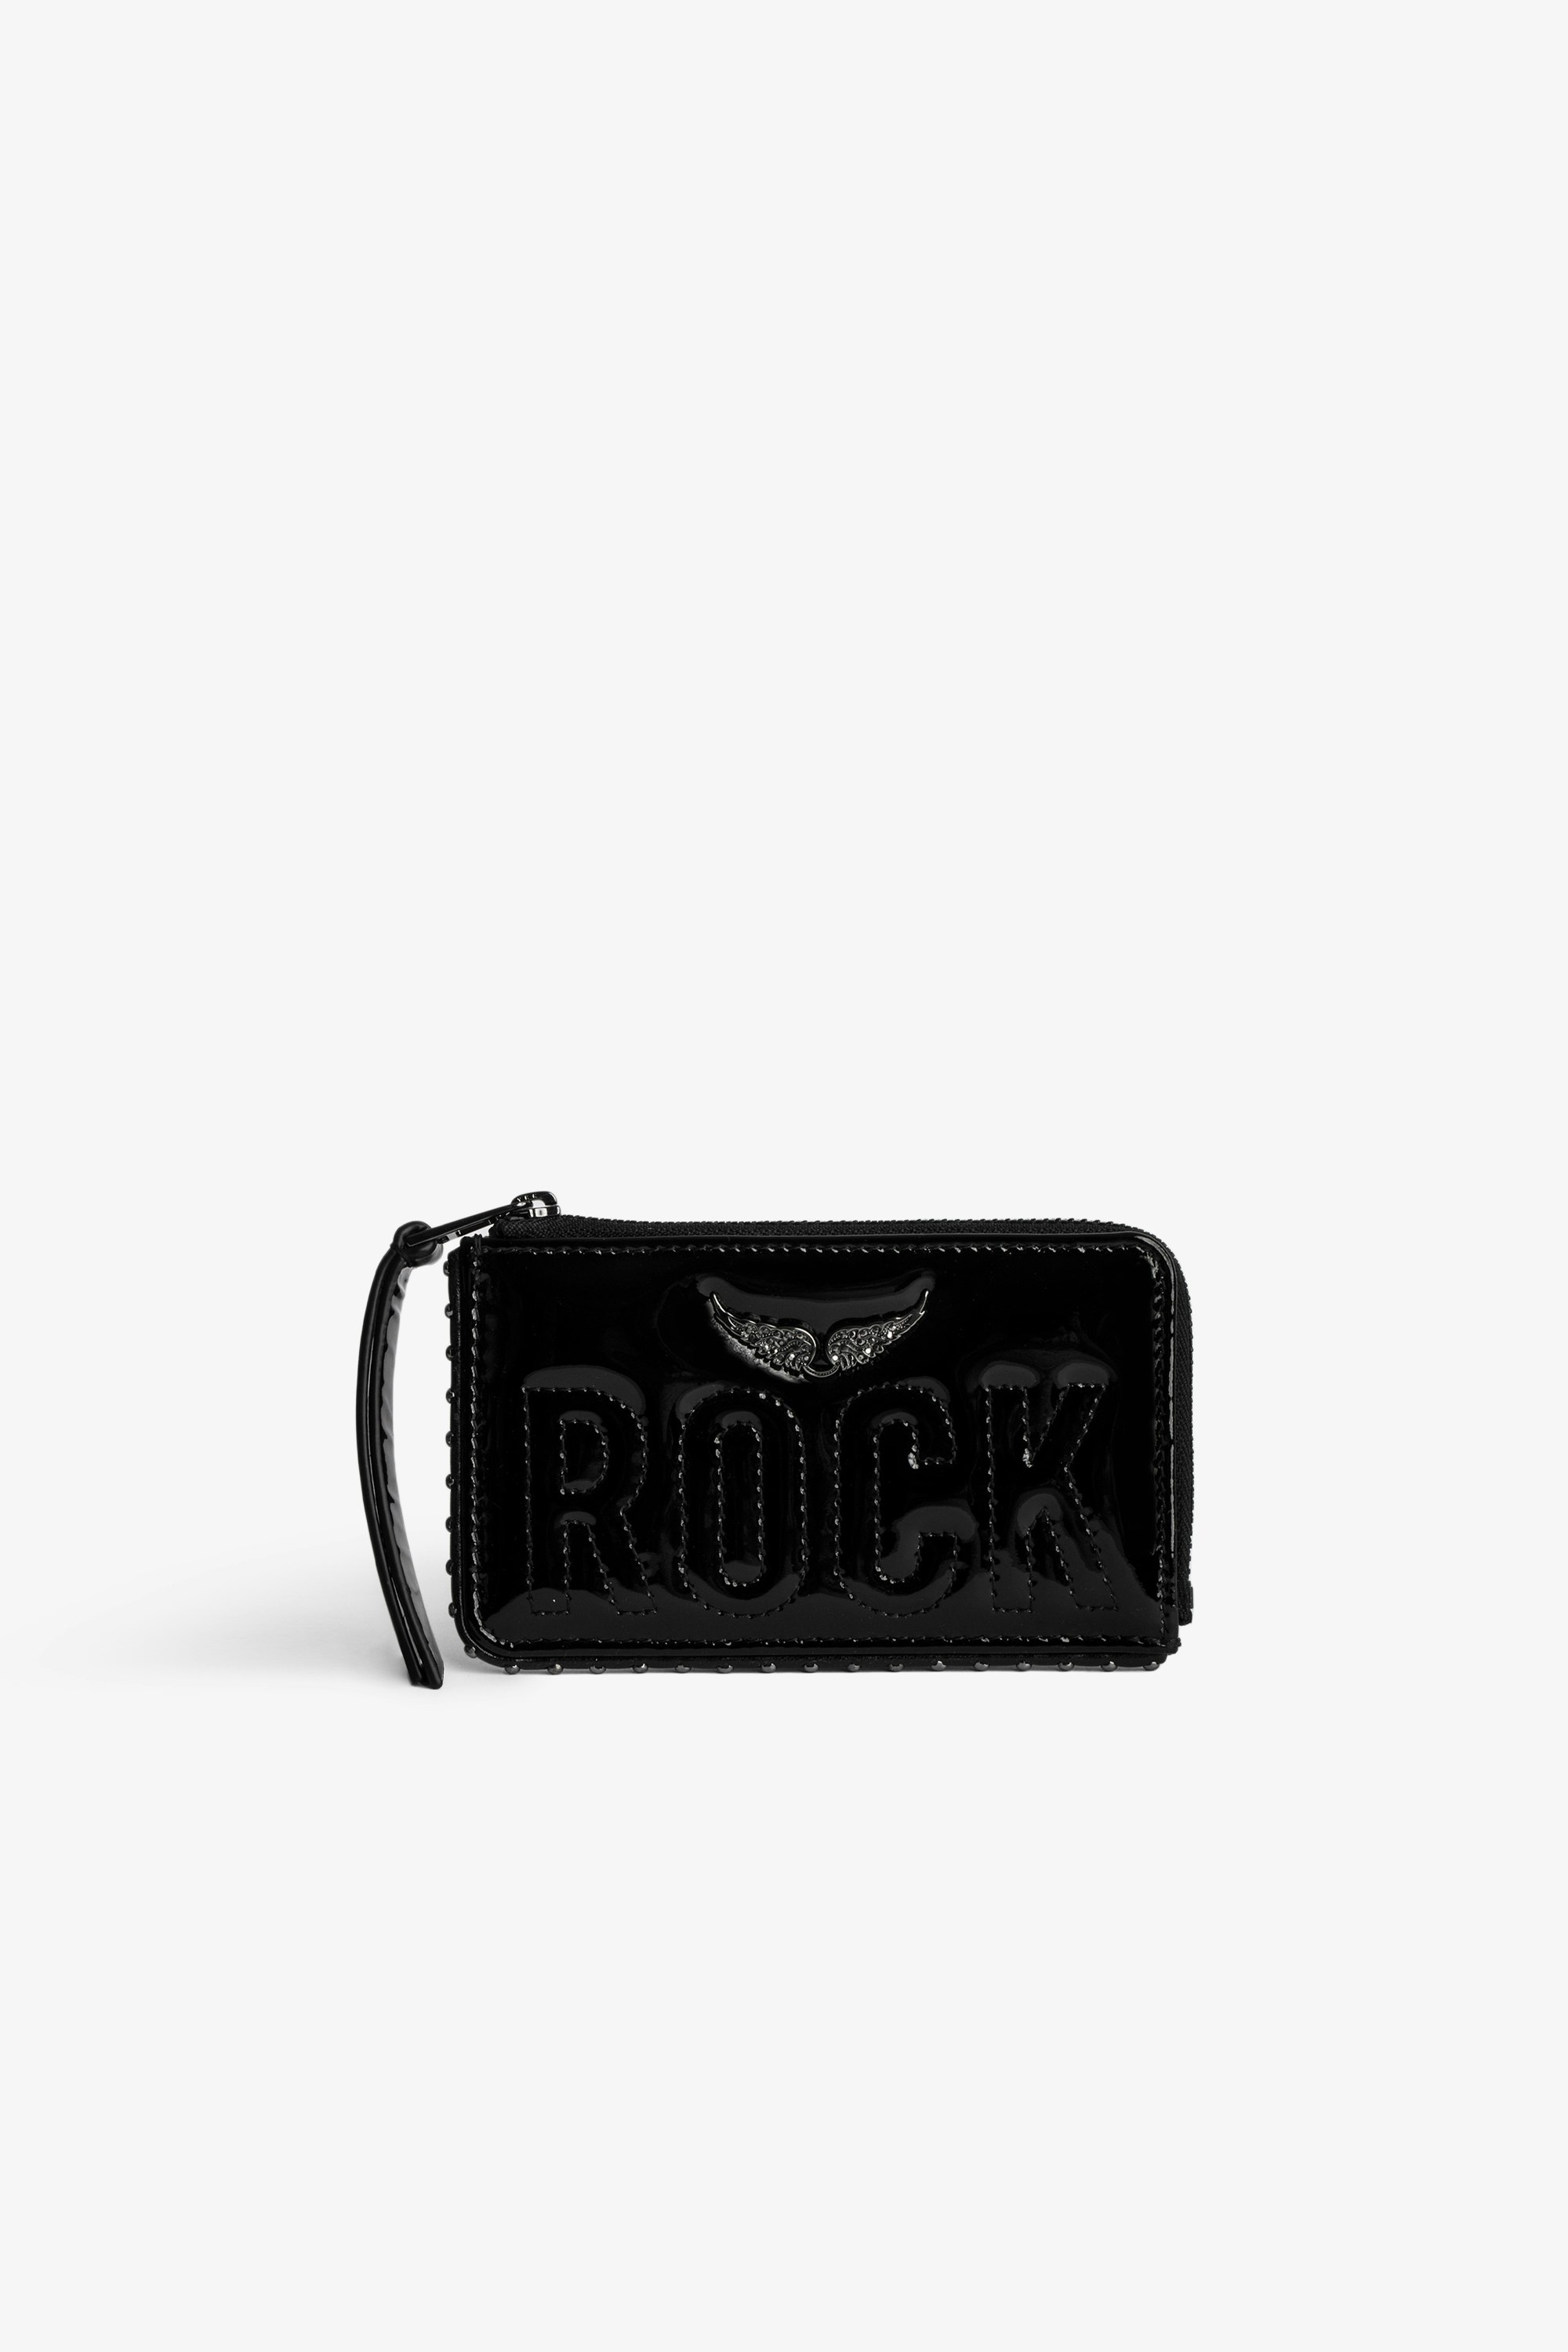 ZV Card 財布 Women’s black patent leather zipped card holder with slots, topstitched “Rock” slogan and crystal-embellished wings charm